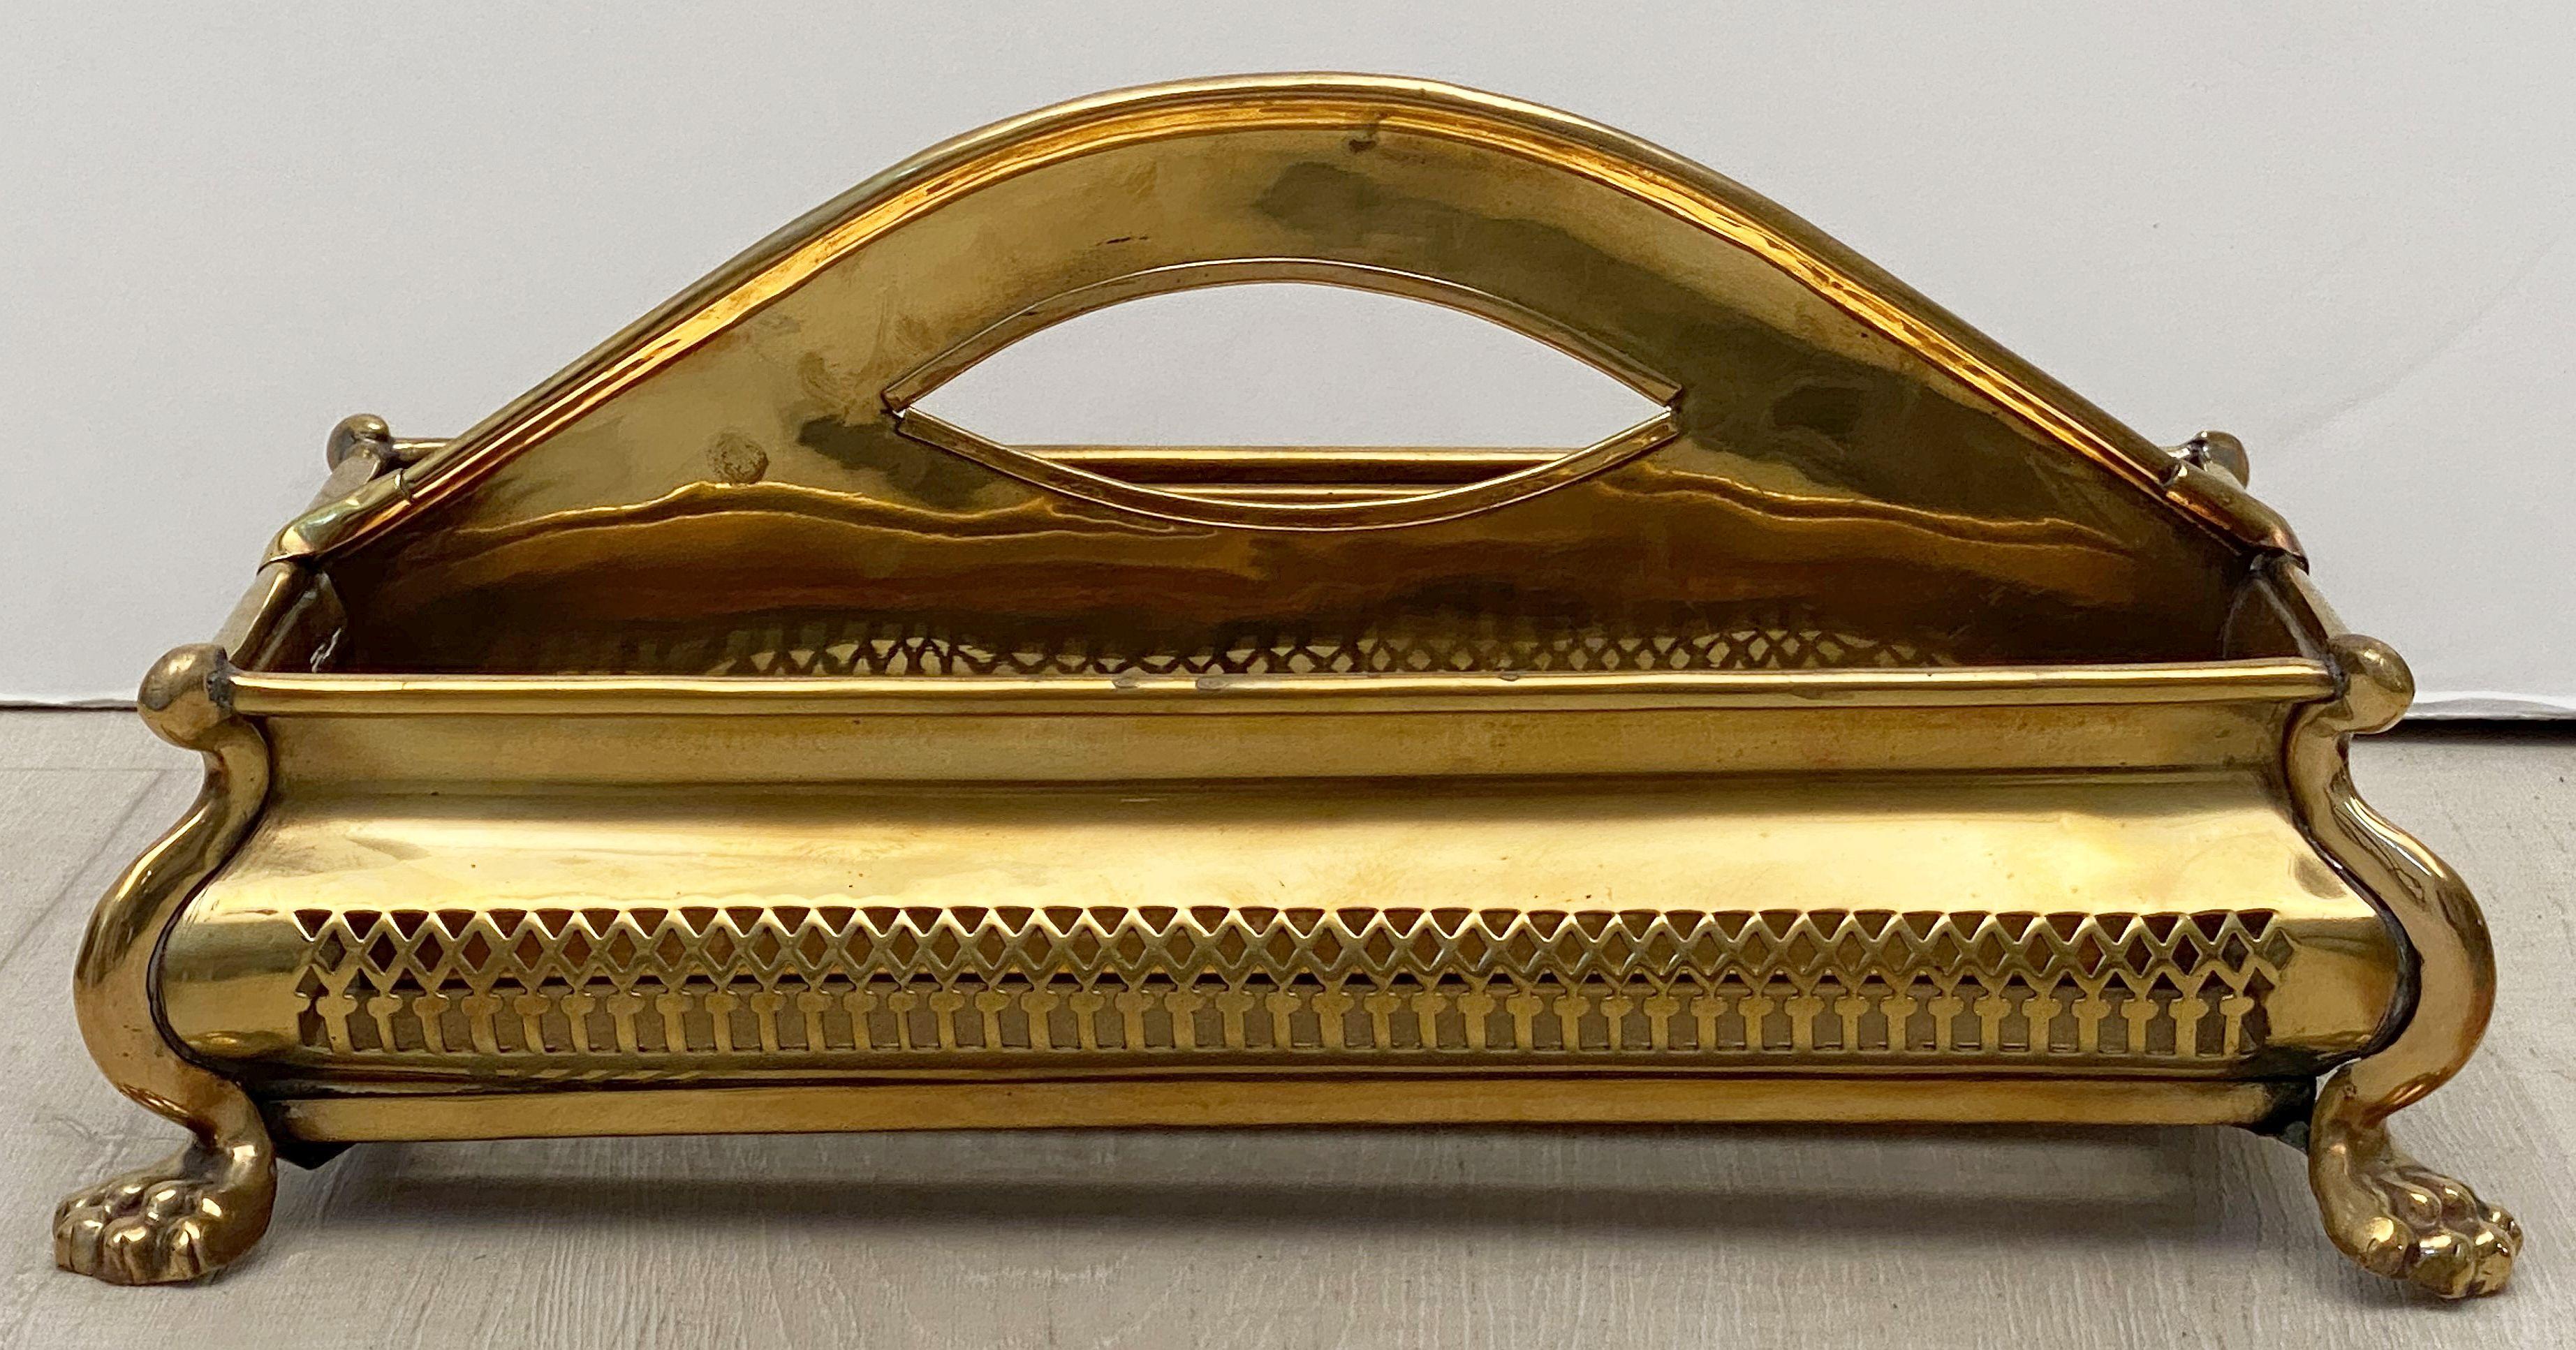 A fine English cutlery tray of brass from the 19th century - of rectangular form with pierced sides and center divide, raised on lion's paw feet.

A lovely piece of kitchenalia or a special culinary gift for a gourmet or foodie!